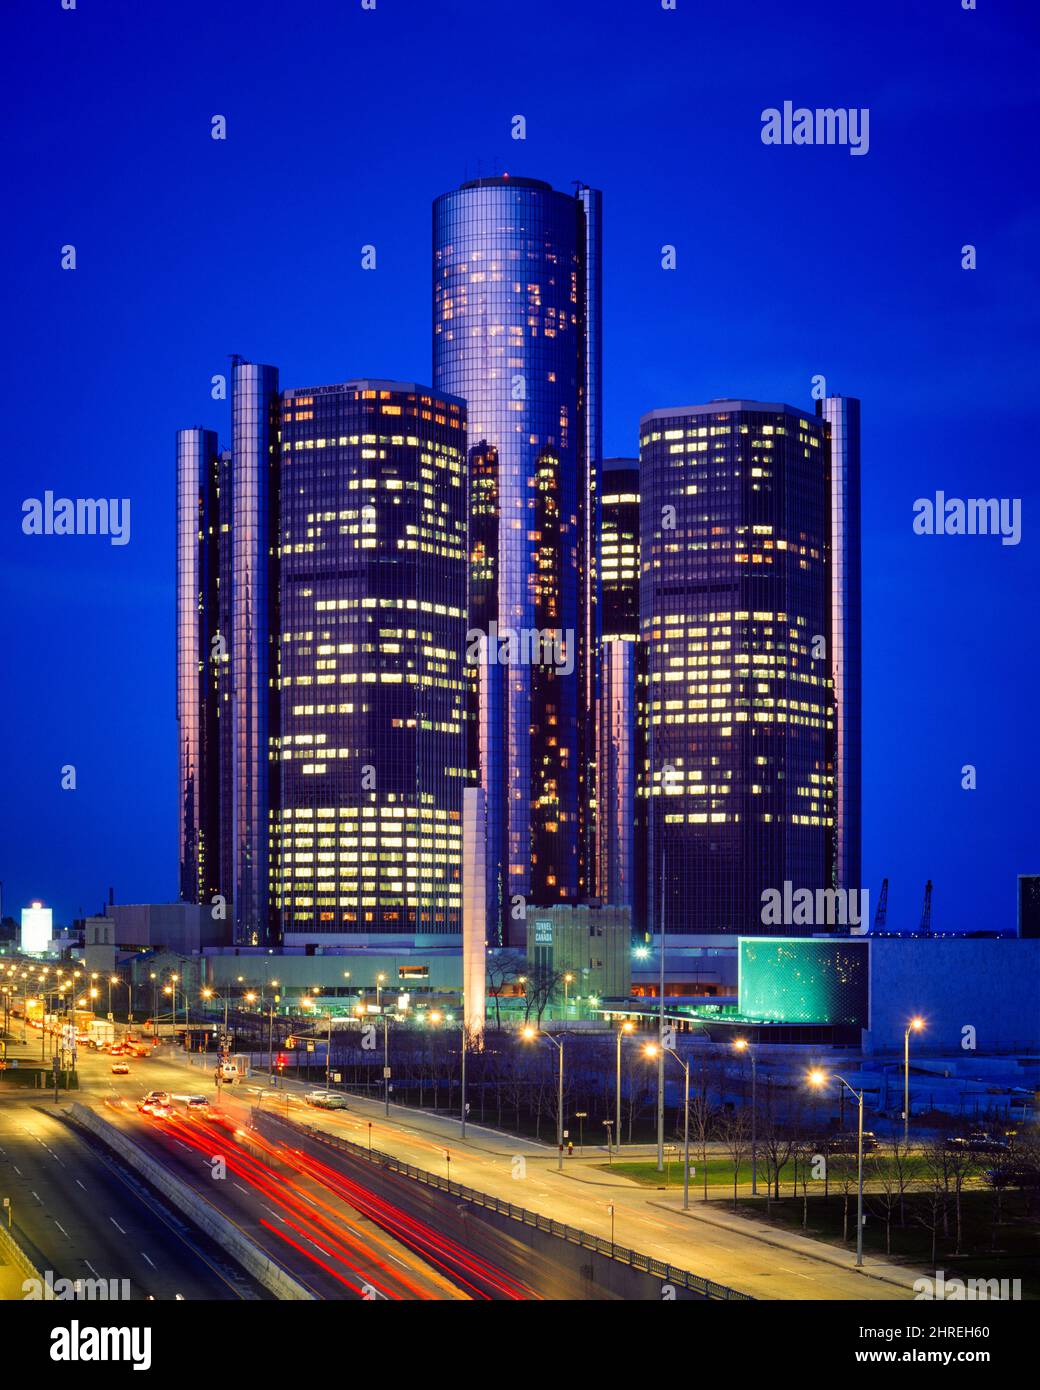 1970s NIGHT SCENE OF THE 1977 CITY WITHIN A CITY RENAISSANCE CENTER DETROIT MICHIGAN USA - kr33078 RSS001 HARS PRIDE BY OPPORTUNITY 1977 REAL ESTATE CONCEPT BROKERS CONCEPTUAL CONNECTED STRUCTURES COMPLEX STYLISH EDIFICE GENERAL MOTORS SHOPPING CENTER OWNED CREATIVITY GROWTH RESTAURANTS SURROUND TOGETHERNESS DETROIT MI MULTIPURPOSE OLD FASHIONED RISING SKYSCRAPERS Stock Photo